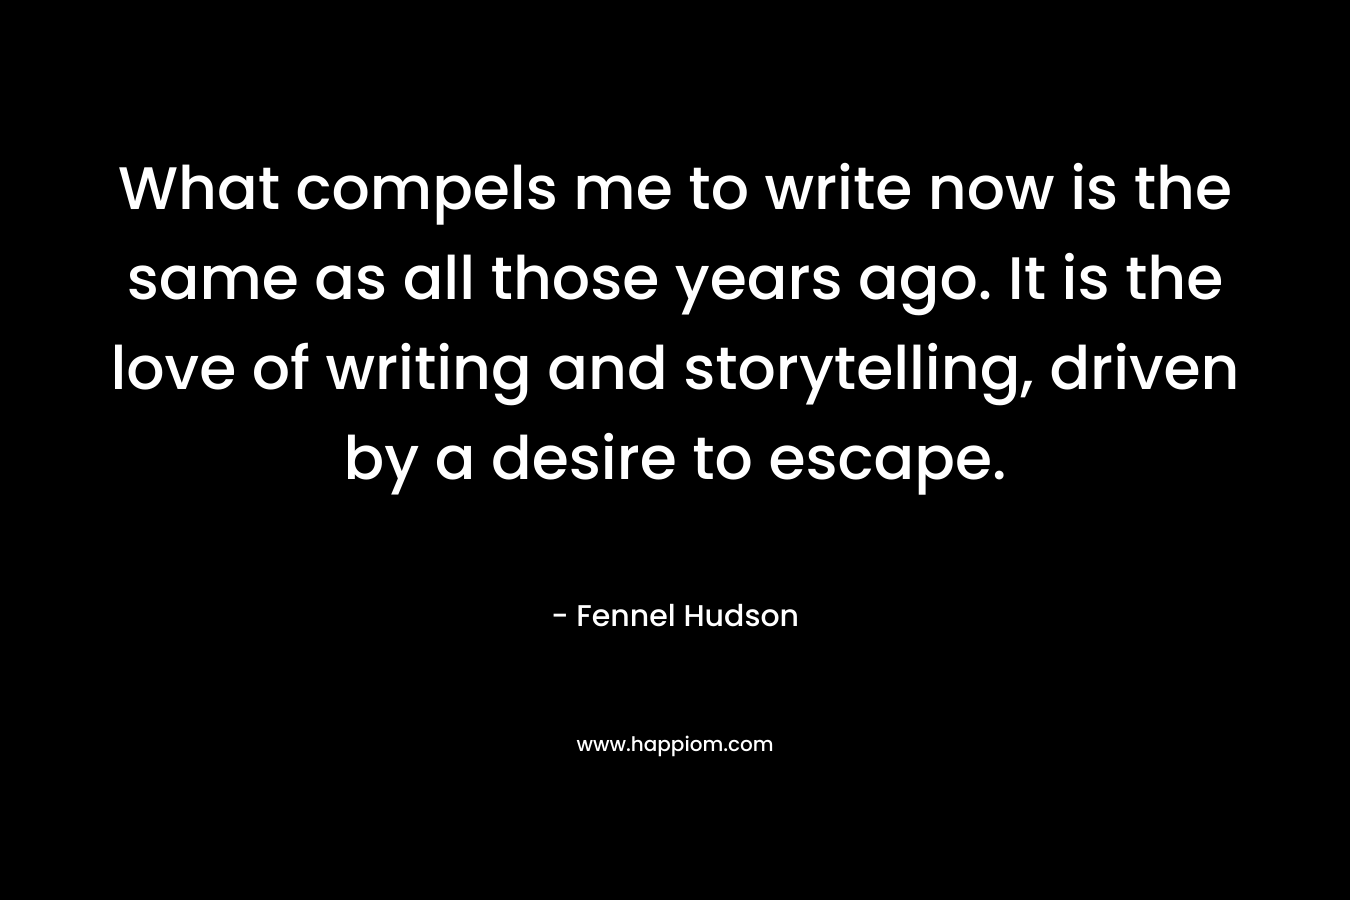 What compels me to write now is the same as all those years ago. It is the love of writing and storytelling, driven by a desire to escape. – Fennel Hudson